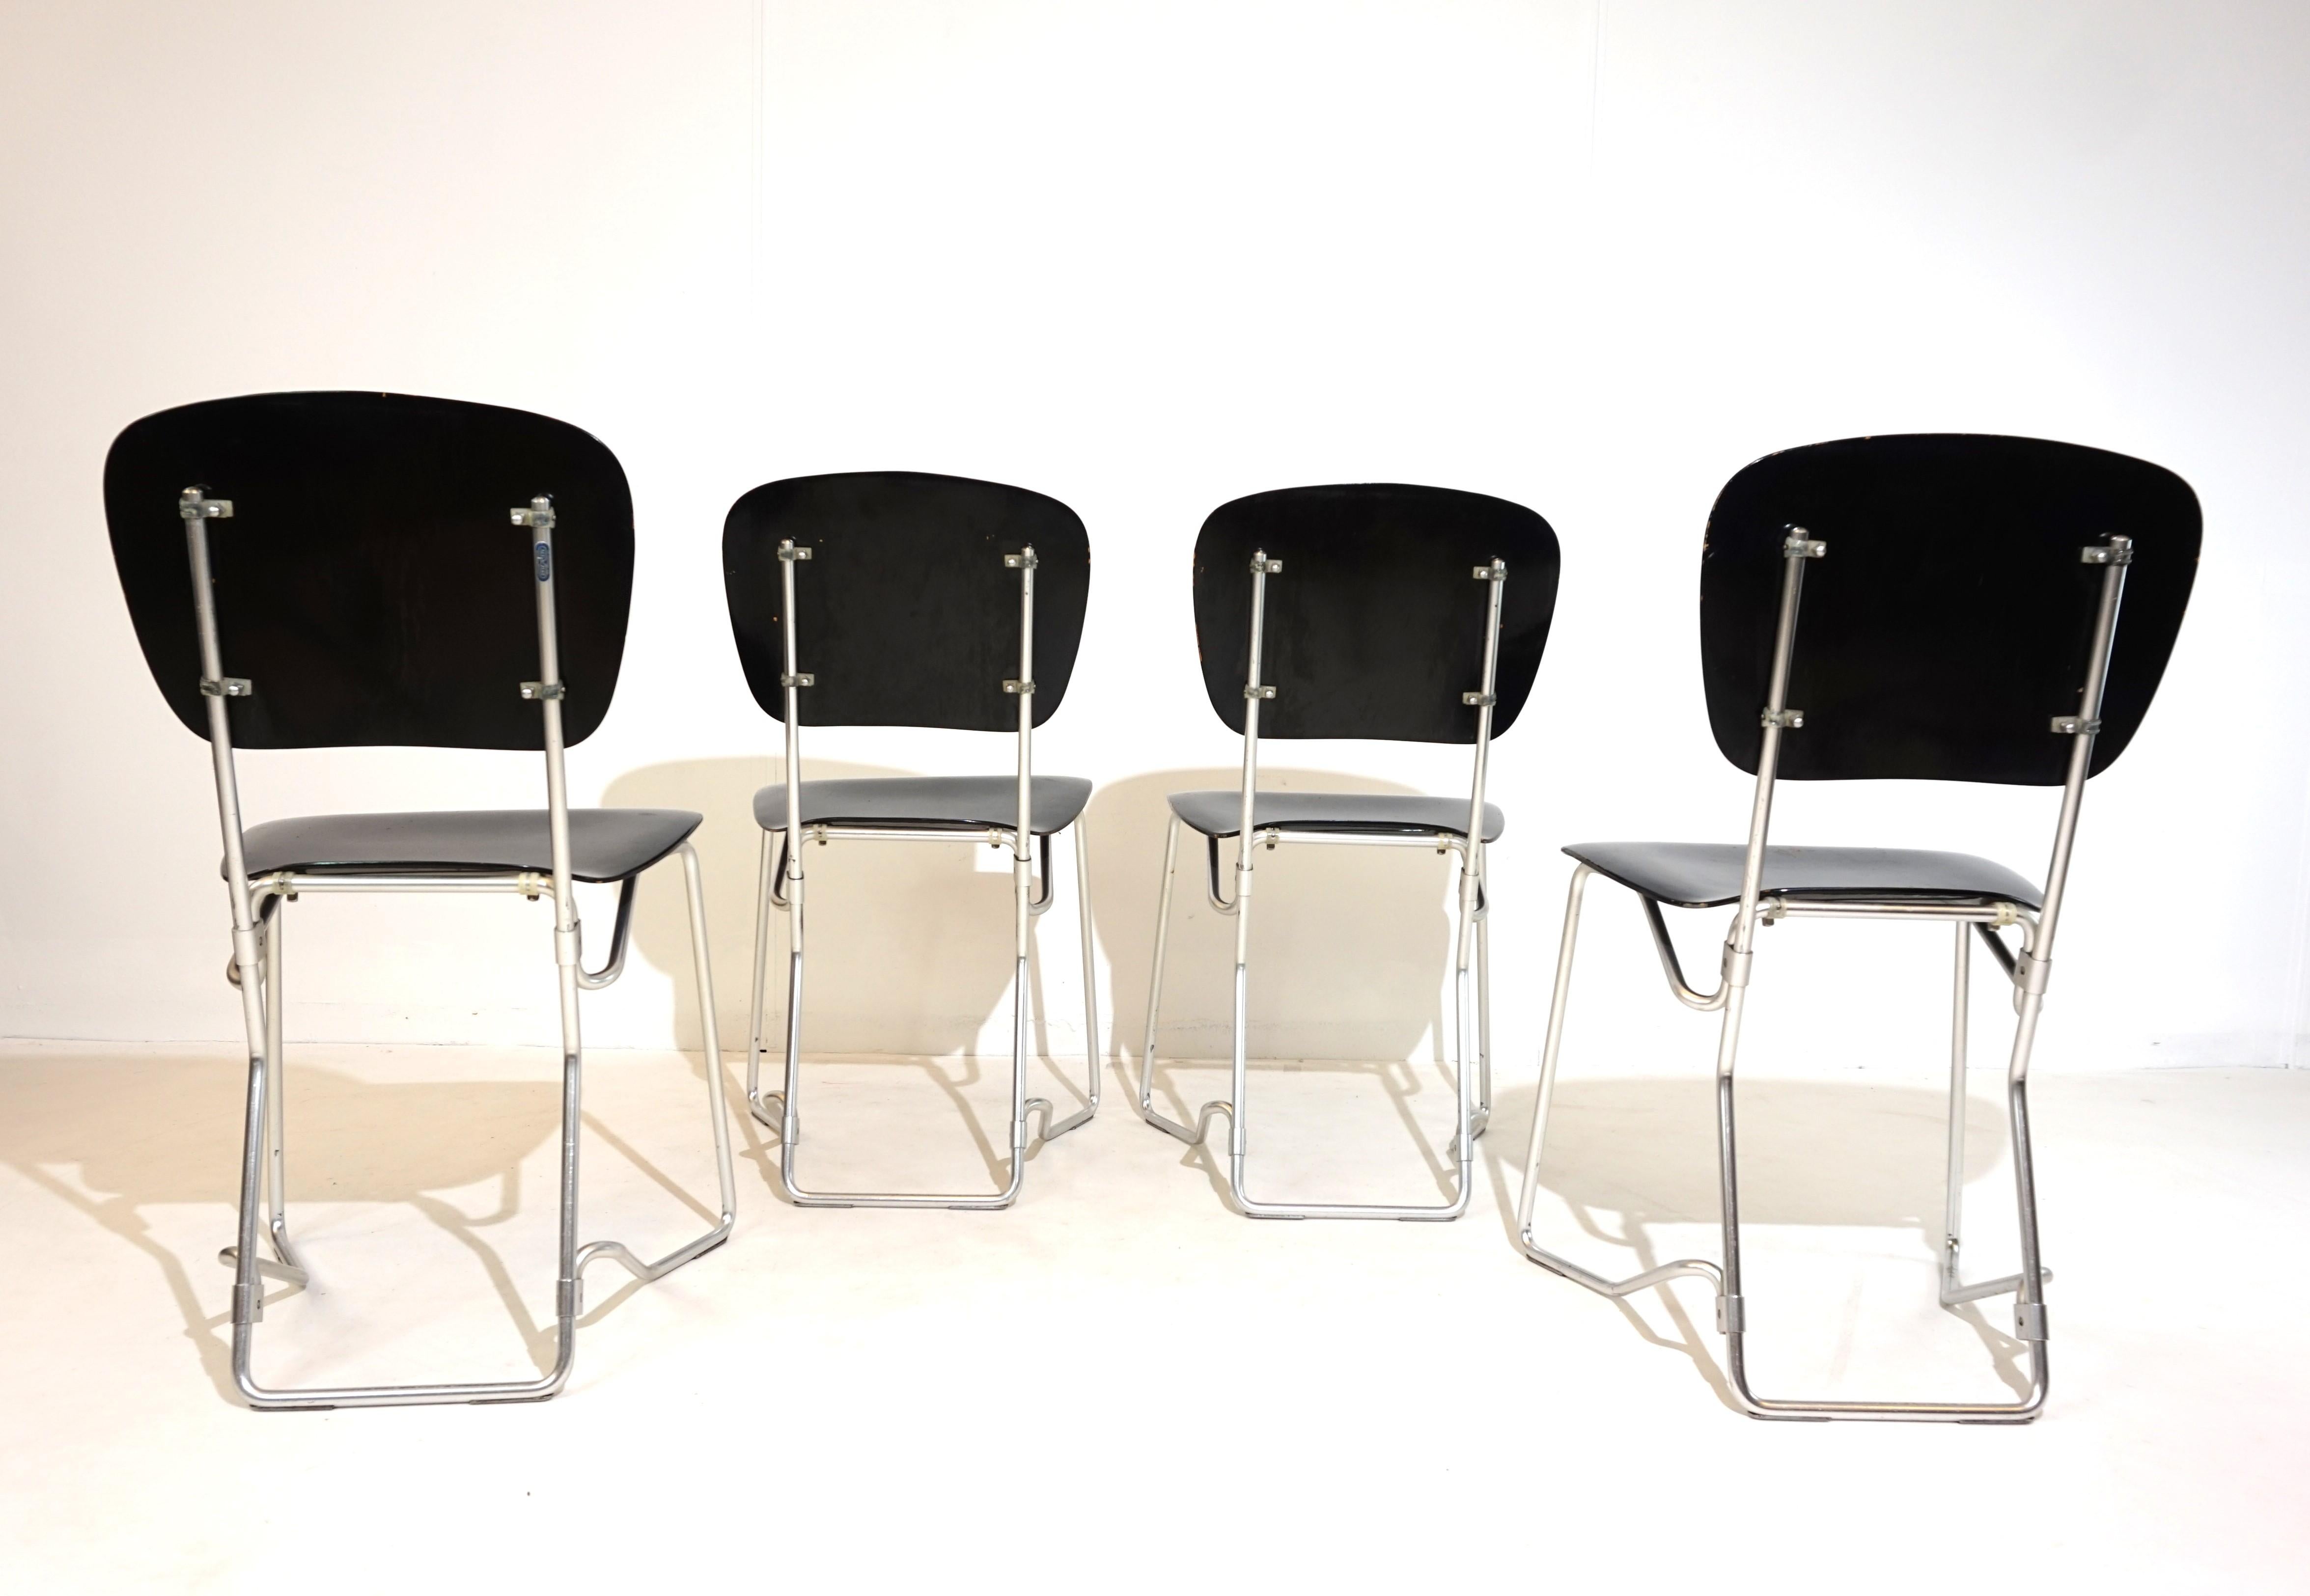 Aluflex set of 4 stacking chairs by Armin Wirth for Ph. Zieringer In Good Condition For Sale In Ludwigslust, DE